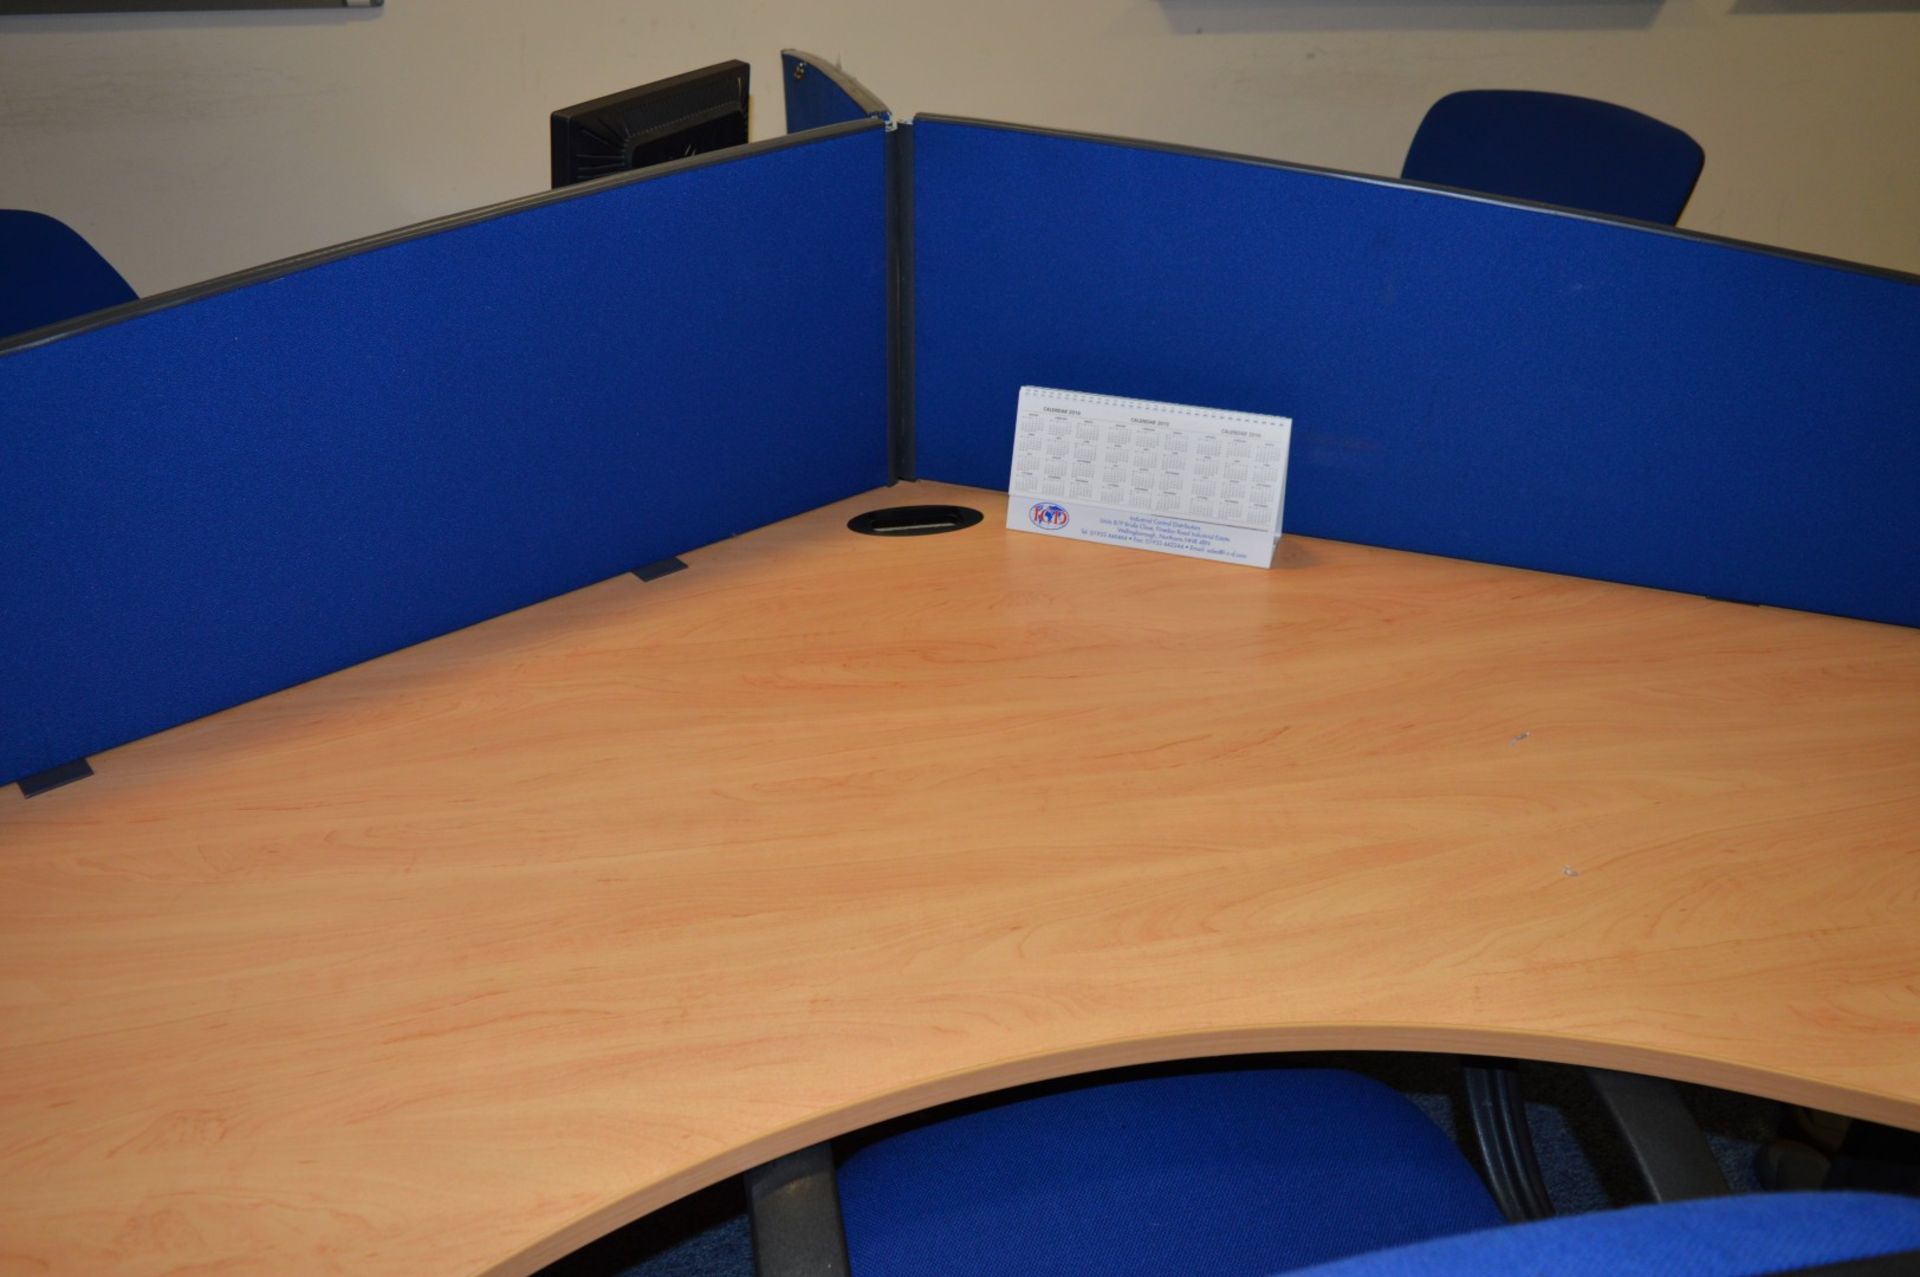 1 x Tripod Office Workstation Desk With Chairs - Suitable For 3 Users - Includes Three Premium - Image 5 of 6